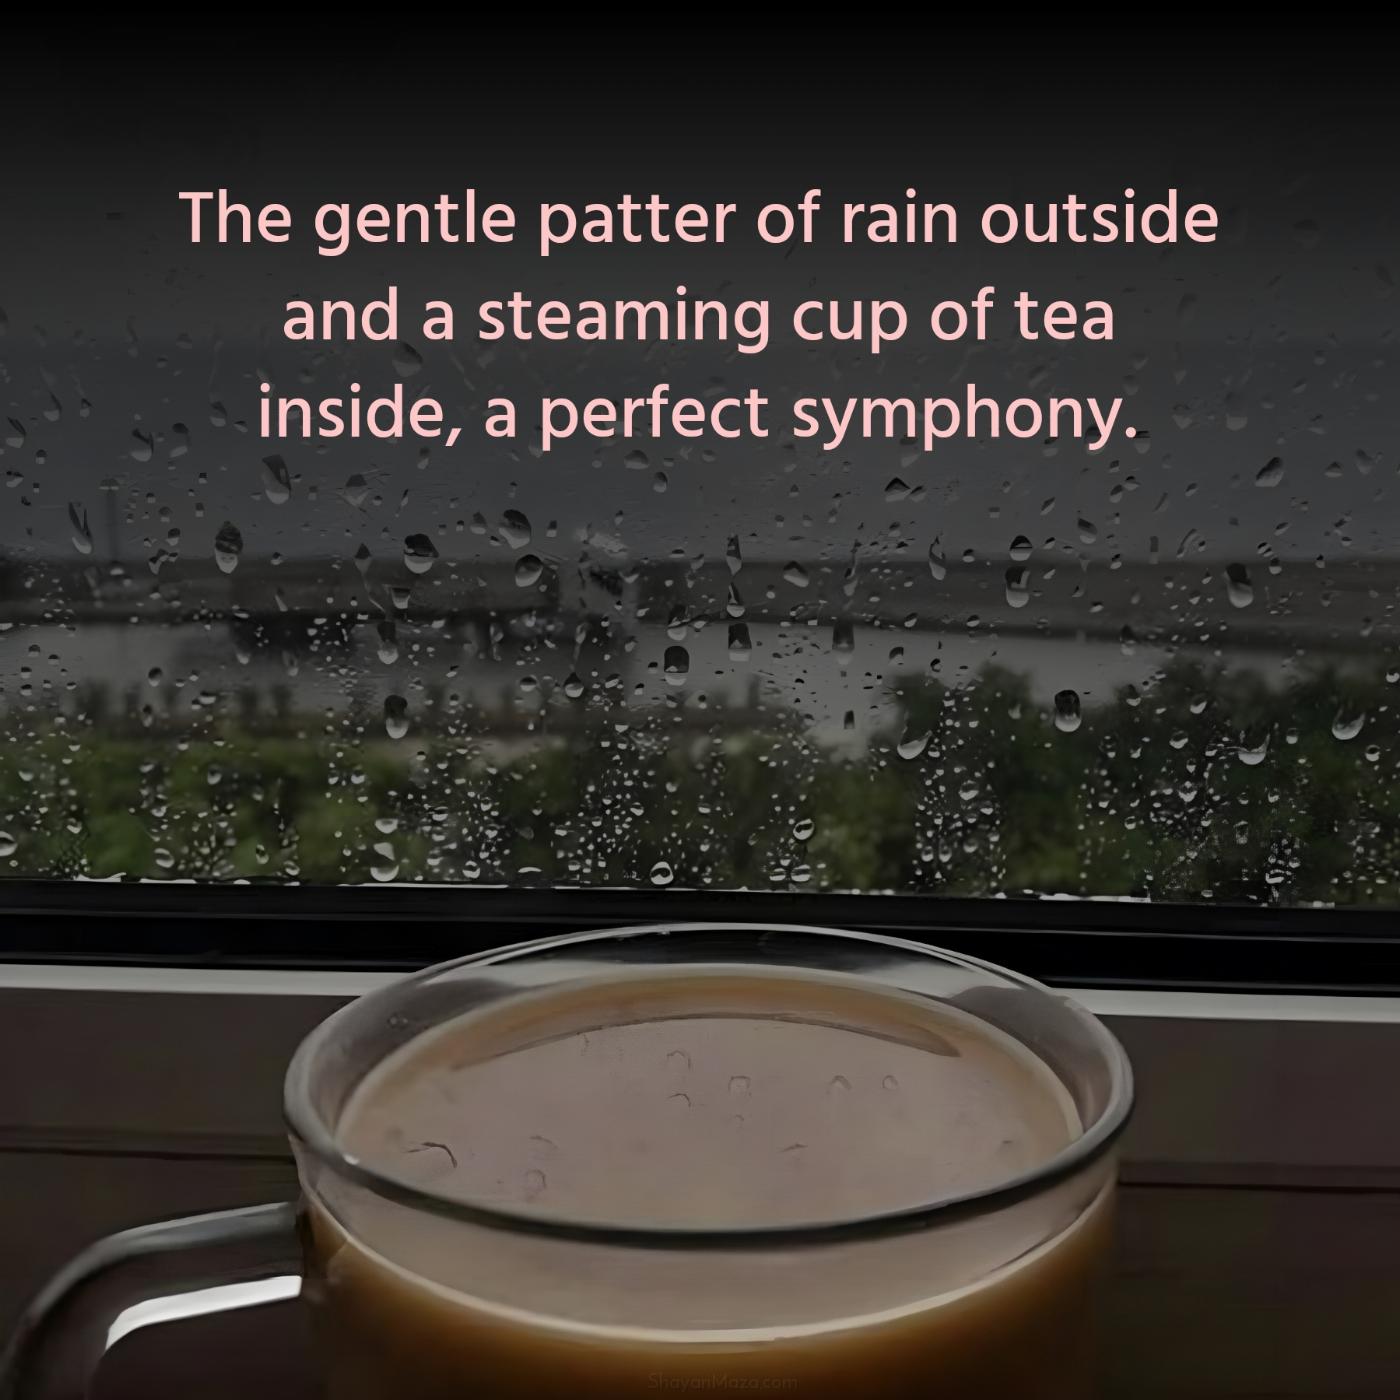 The gentle patter of rain outside and a steaming cup of tea inside